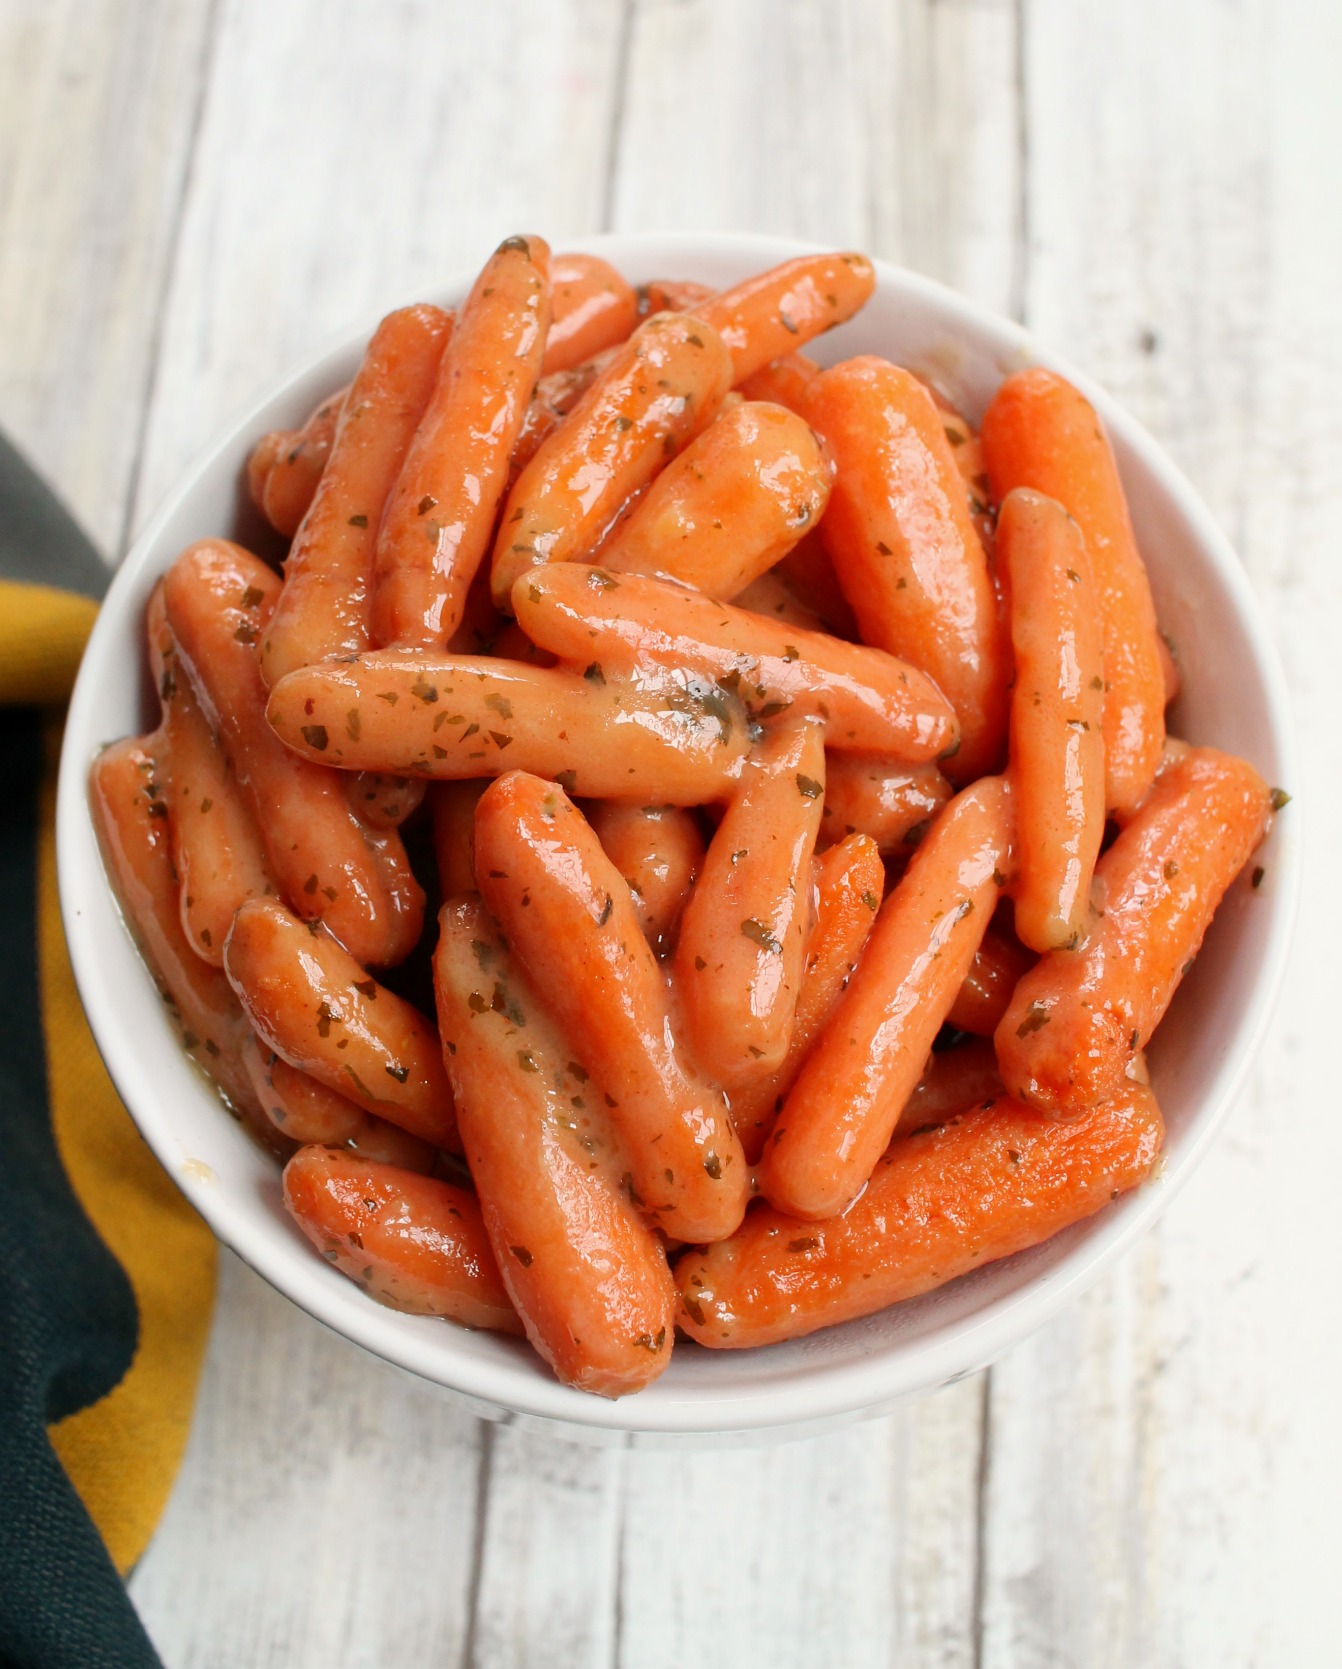 Ranch Glazed Carrots in a white bowl